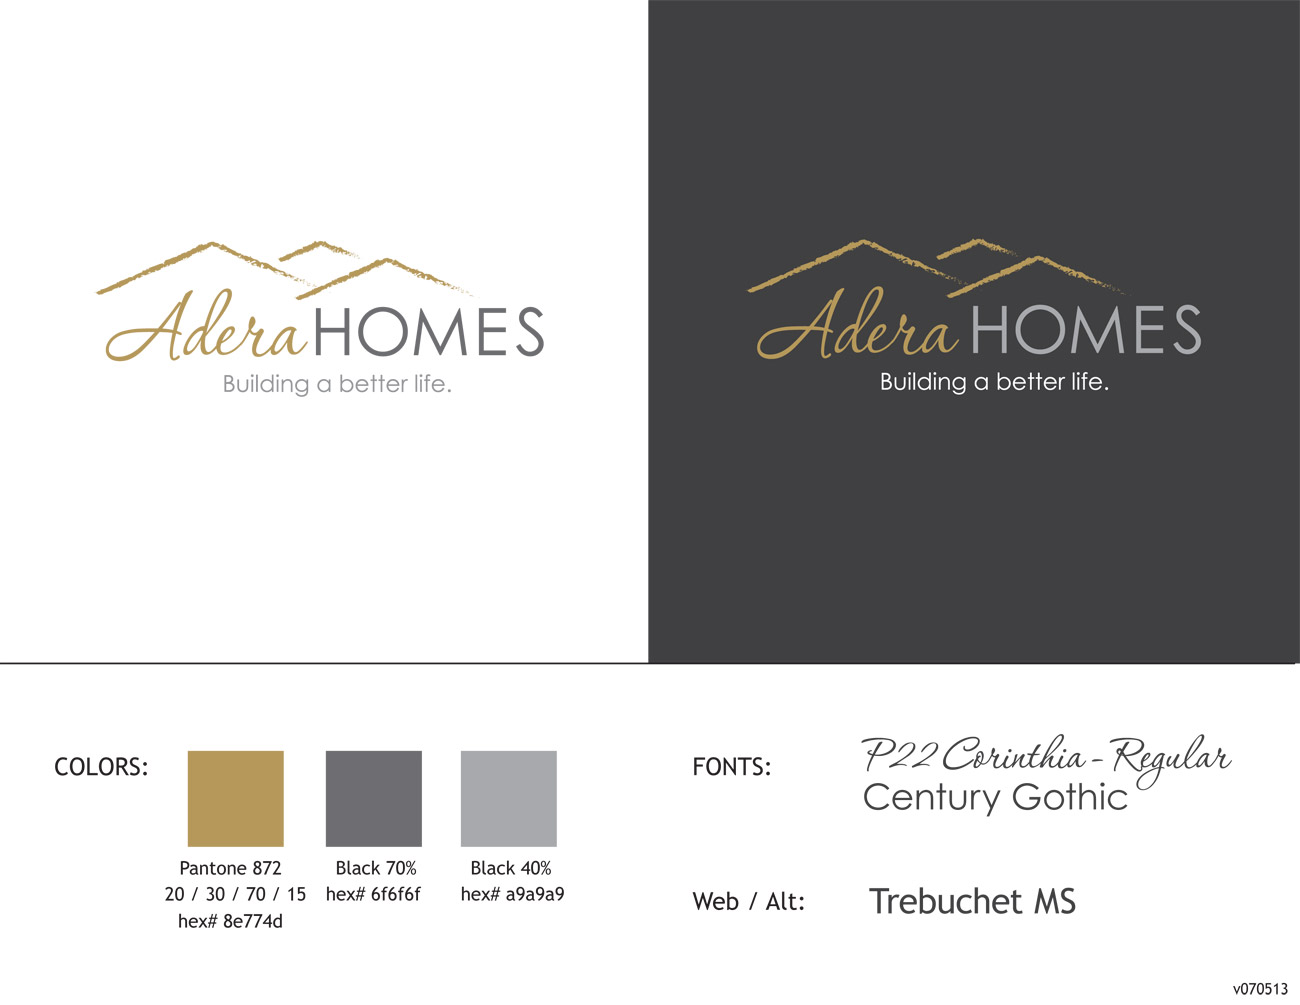 AderaHomes brand guidelines